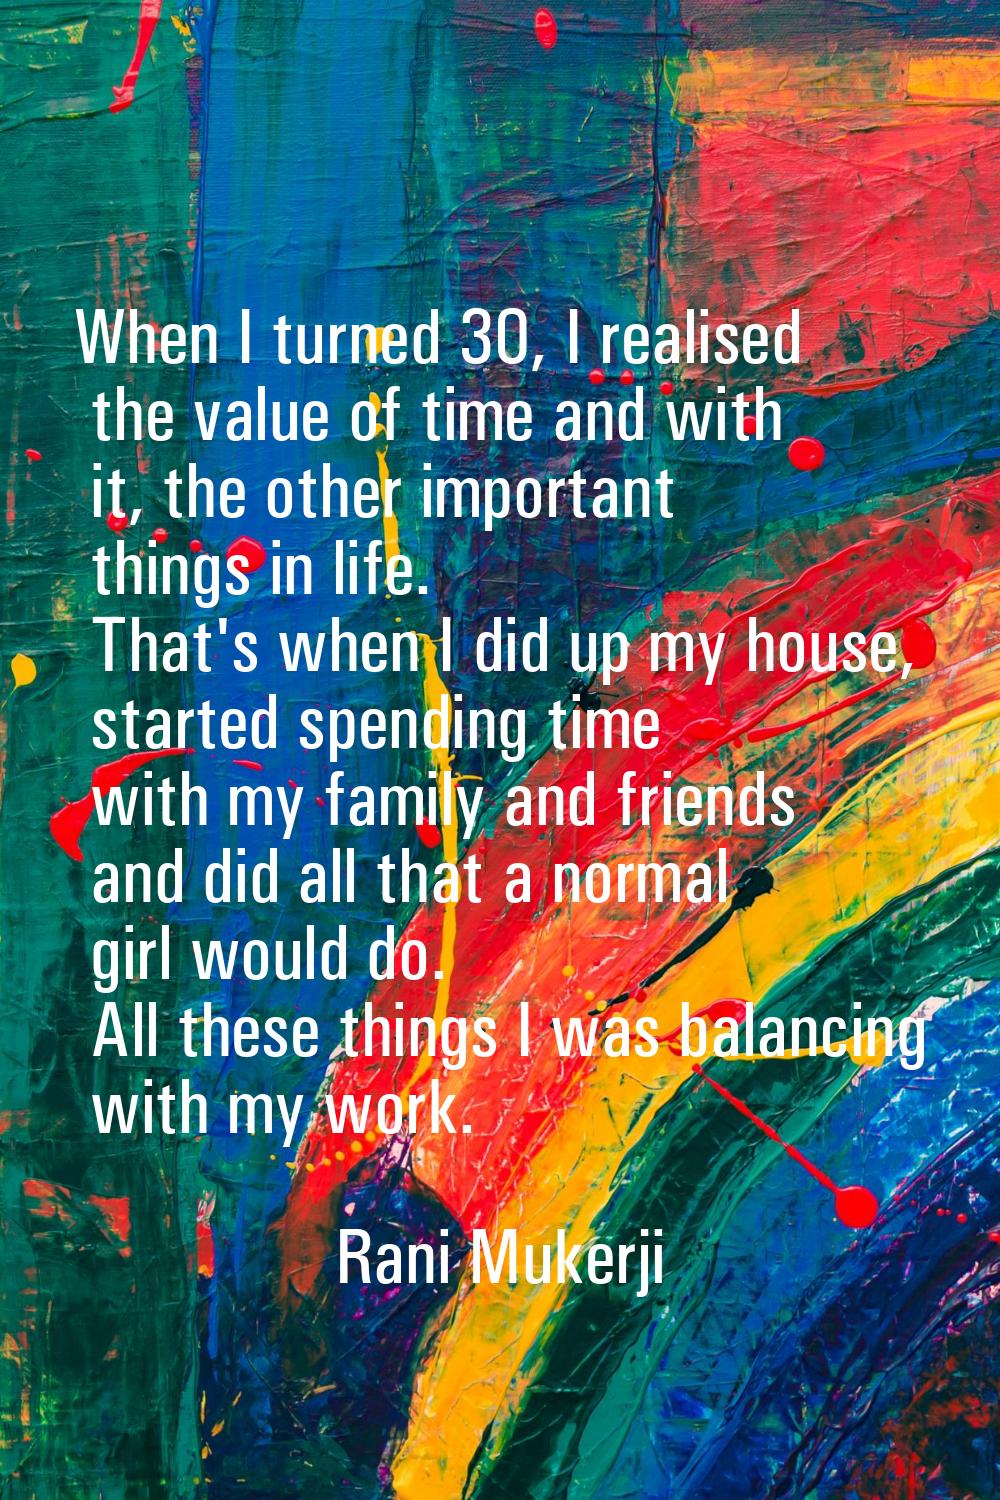 When I turned 30, I realised the value of time and with it, the other important things in life. Tha